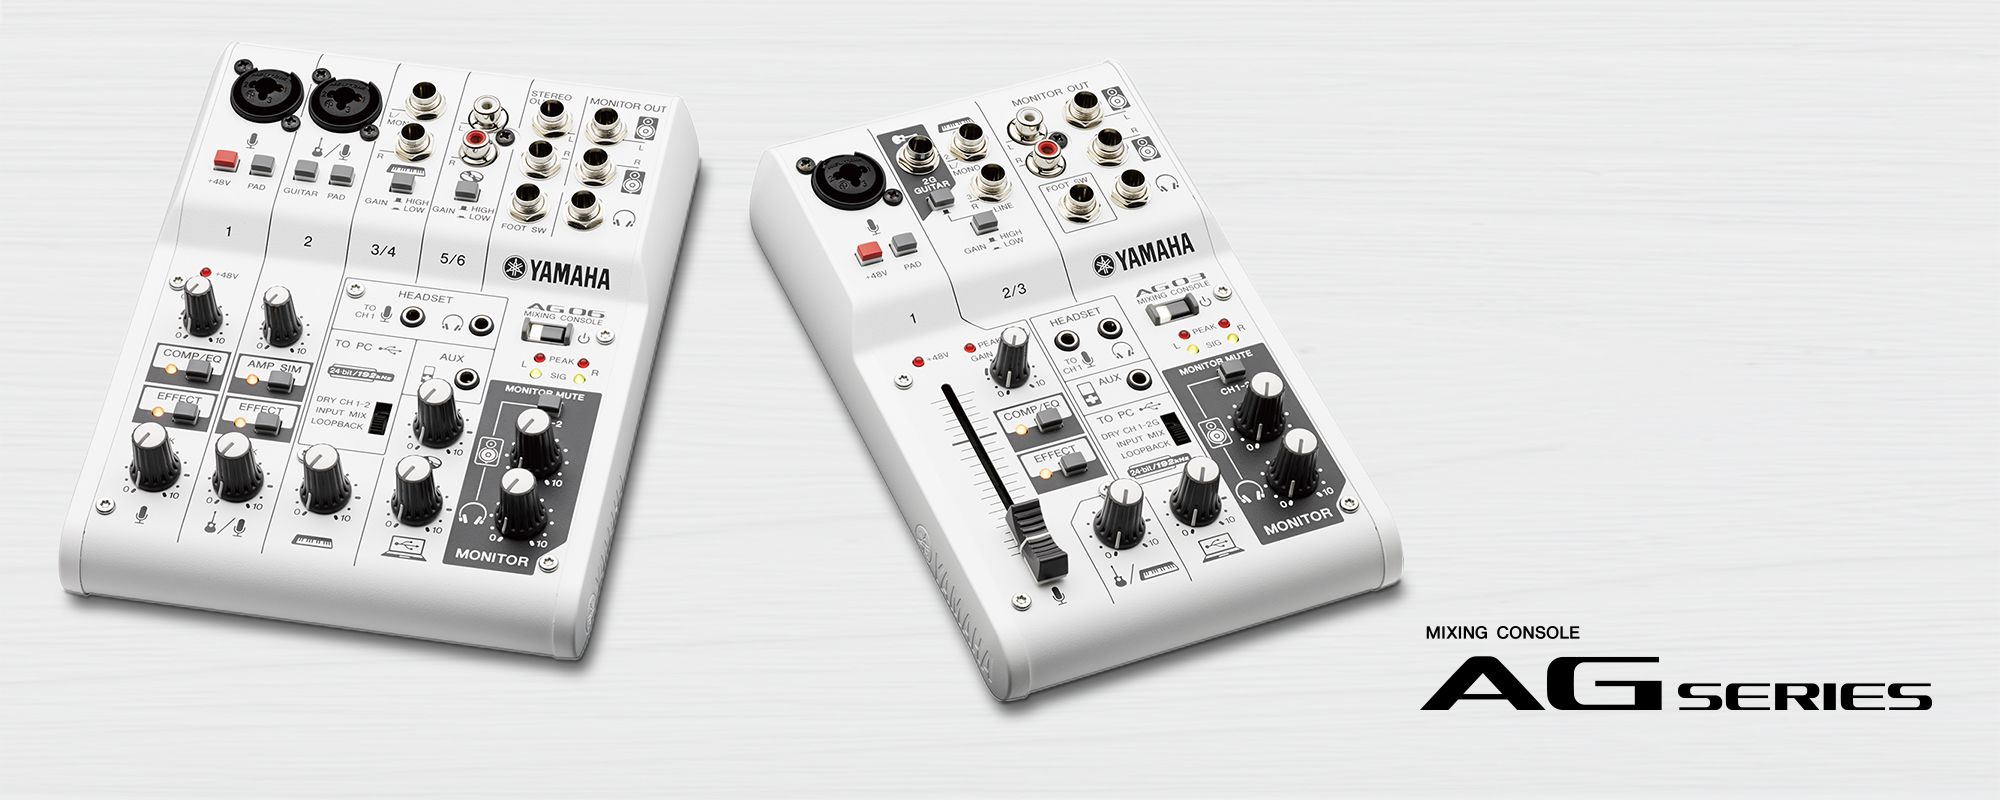 AG06 / AG03 - Specs - Interfaces - Synthesizers & Music Production